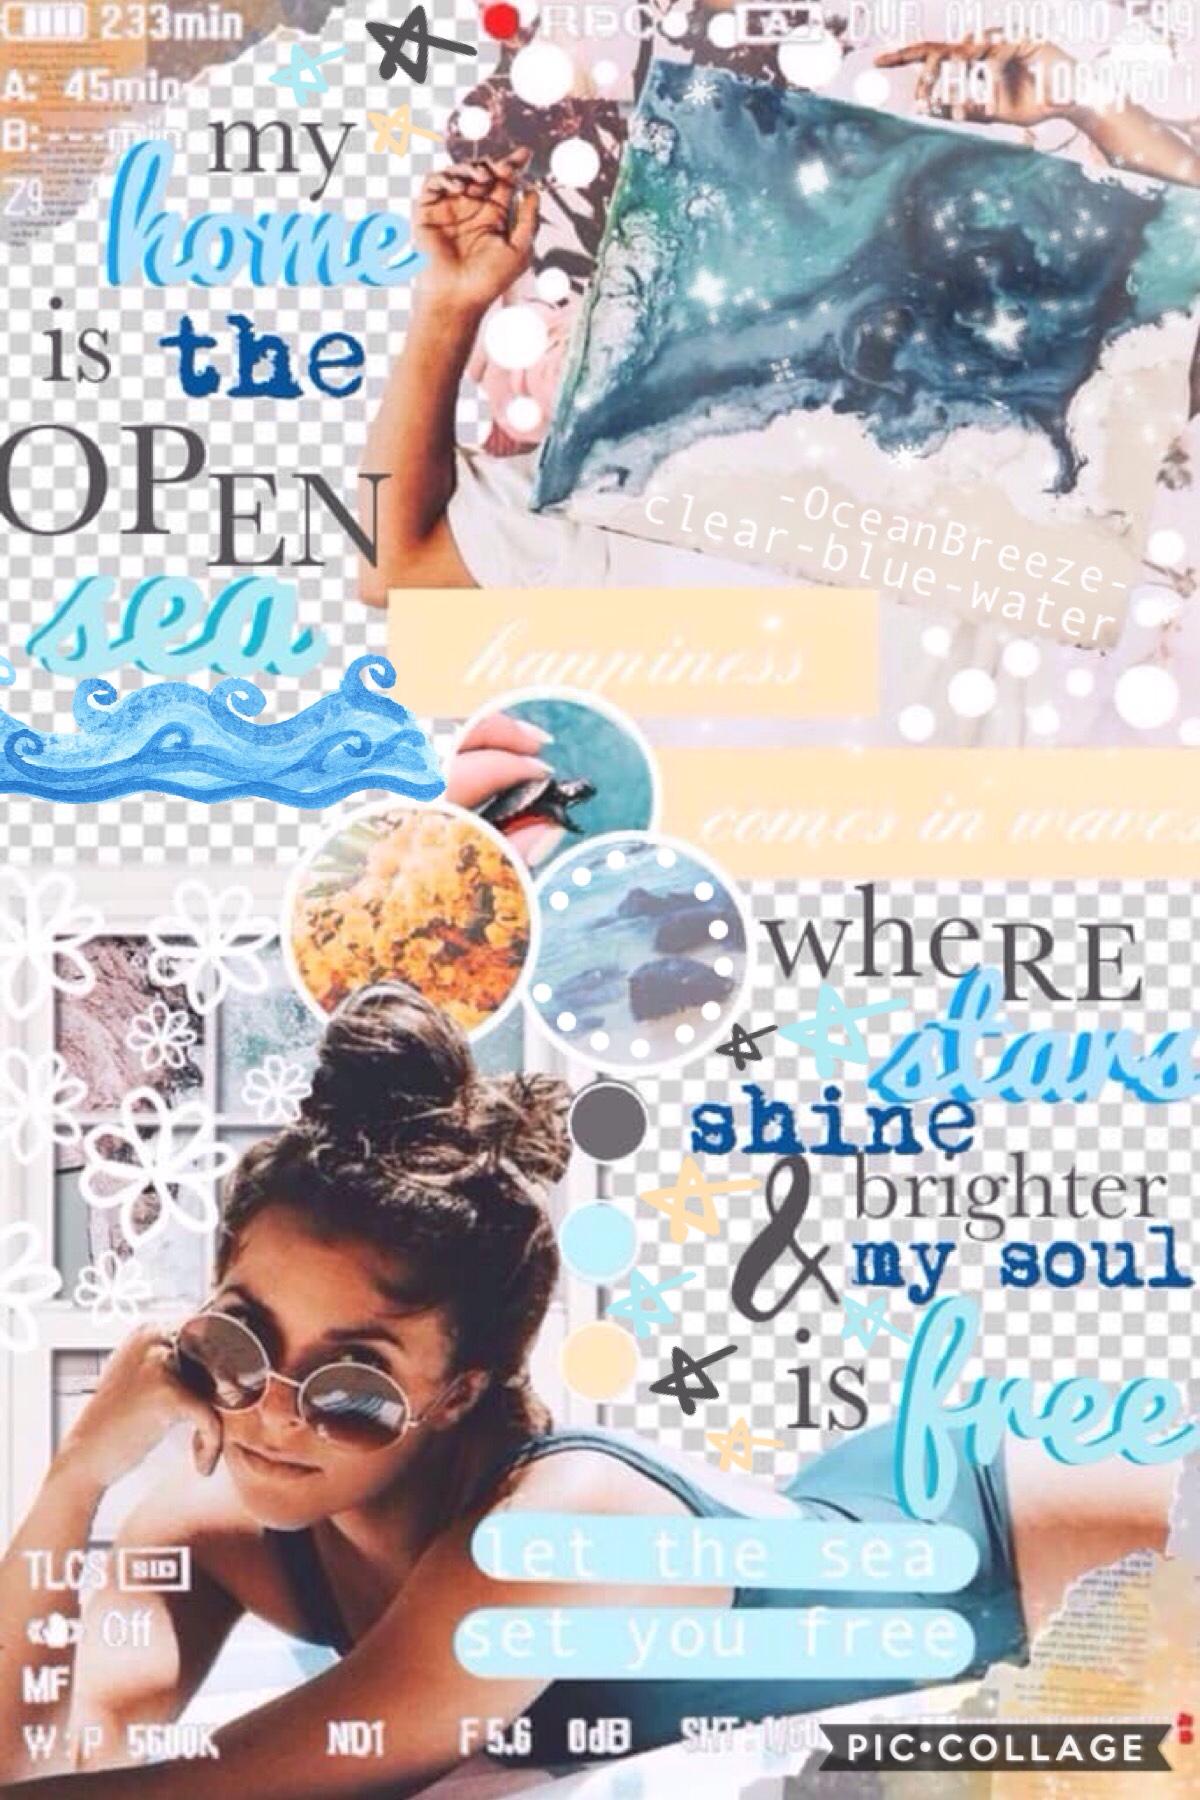 🏝T A P🏝
Collab with the fabulous -OceanBreeze-. She gave me some bgs and she did the text.
Also tysm for 1.5K I will do something soon but I haven't decided yet
QOTD: How did you find my account? (stolen from AddictedToVollayball😂)